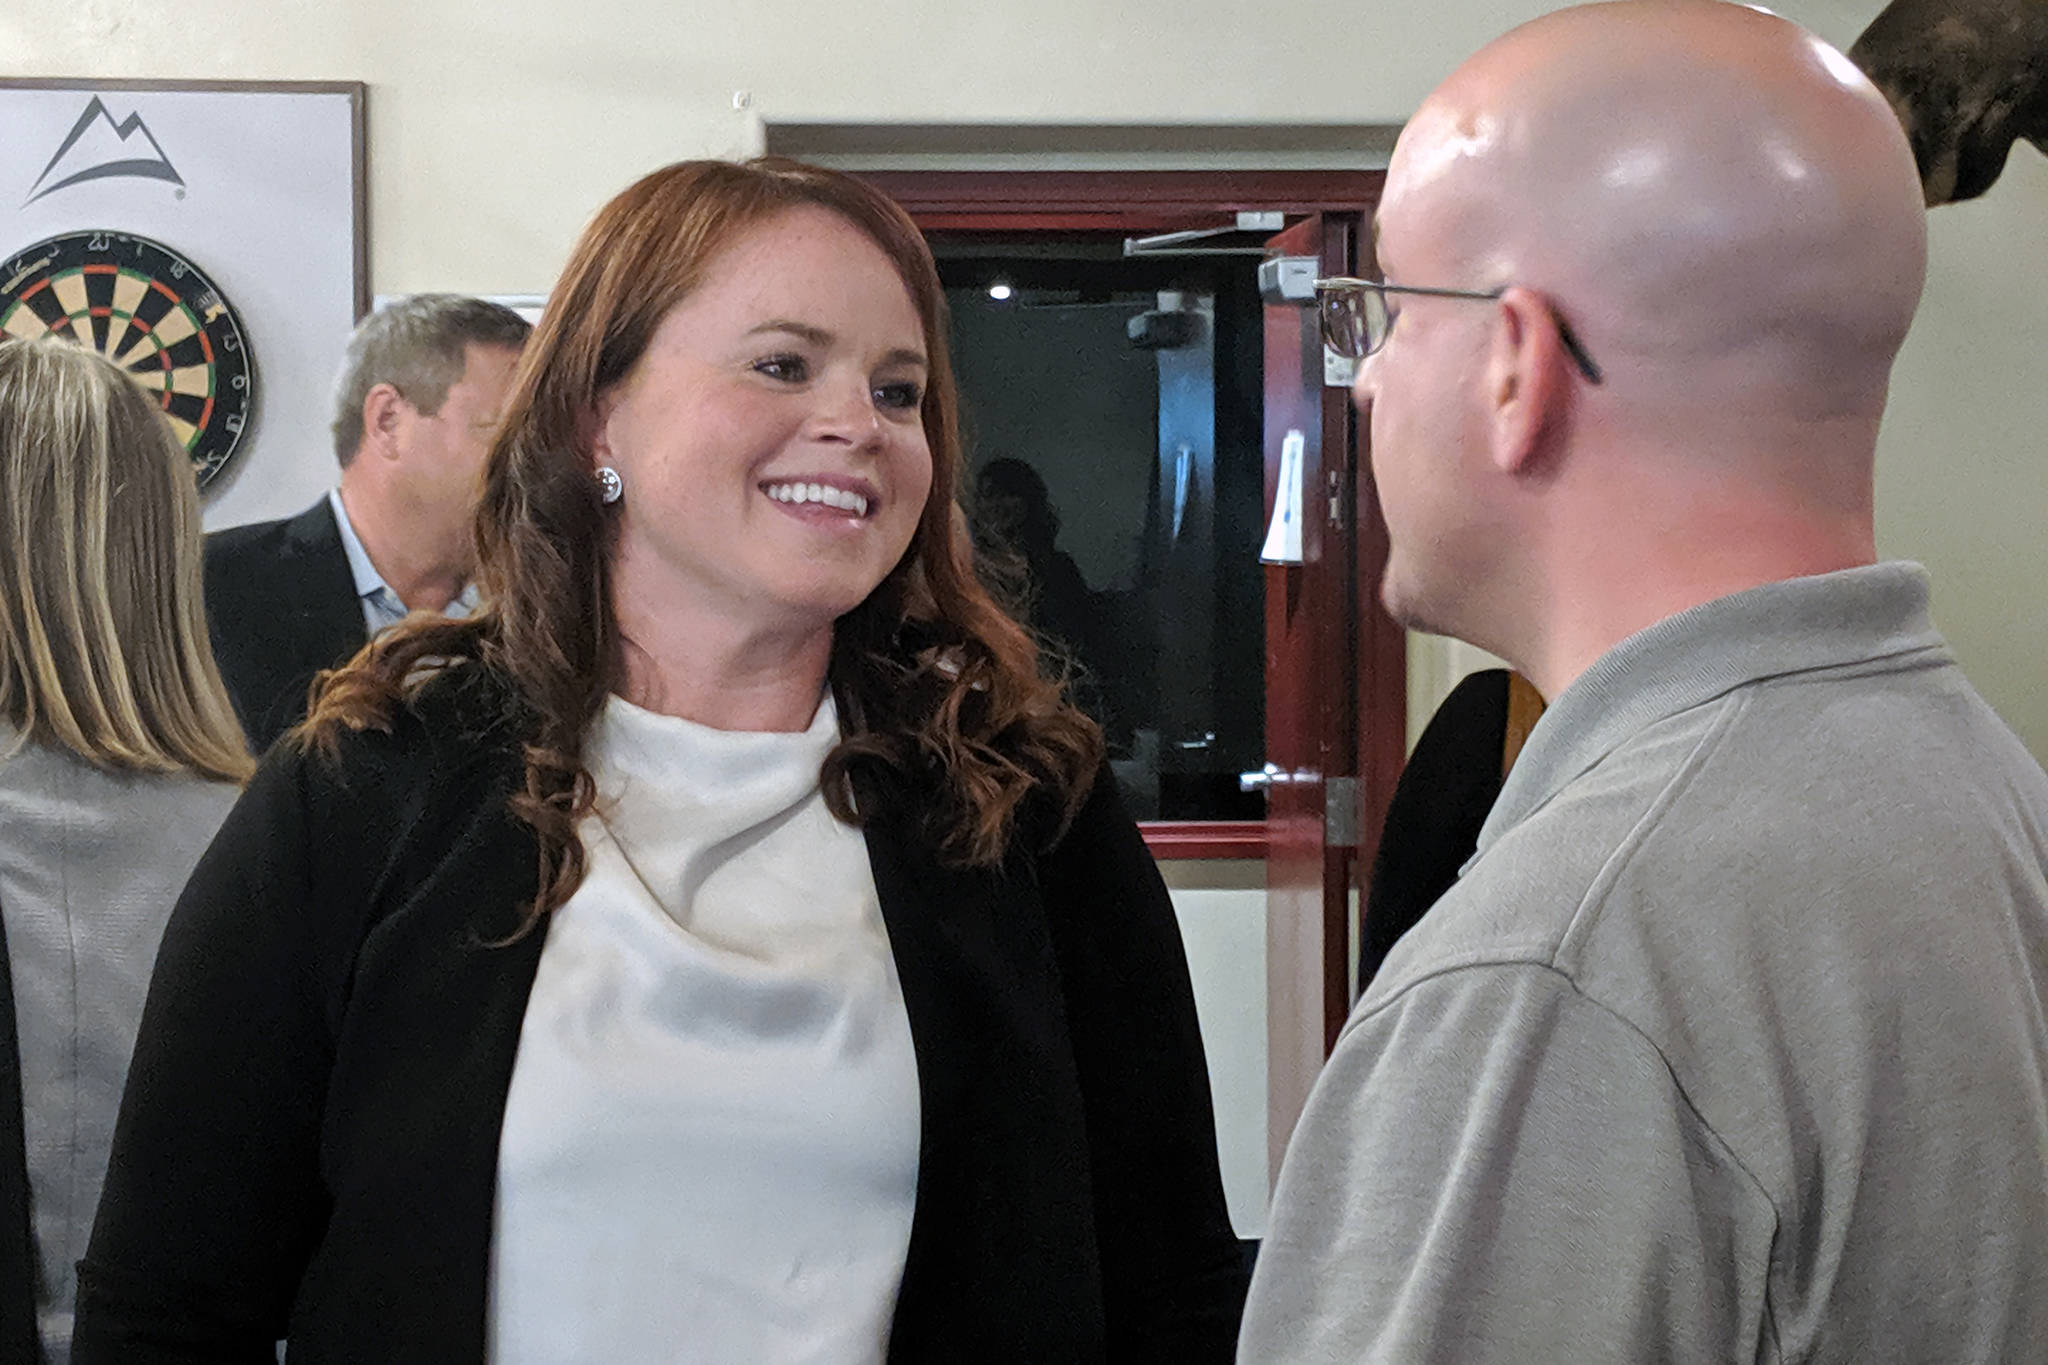 District Attorney Angie Kemp speaks with Assembly member Wade Bryson after her Greater Juneau Chamber of Commerce luncheon presentation, Thursday, Sept. 5, 2019. (Ben Hohenstatt | Juneau Empire)